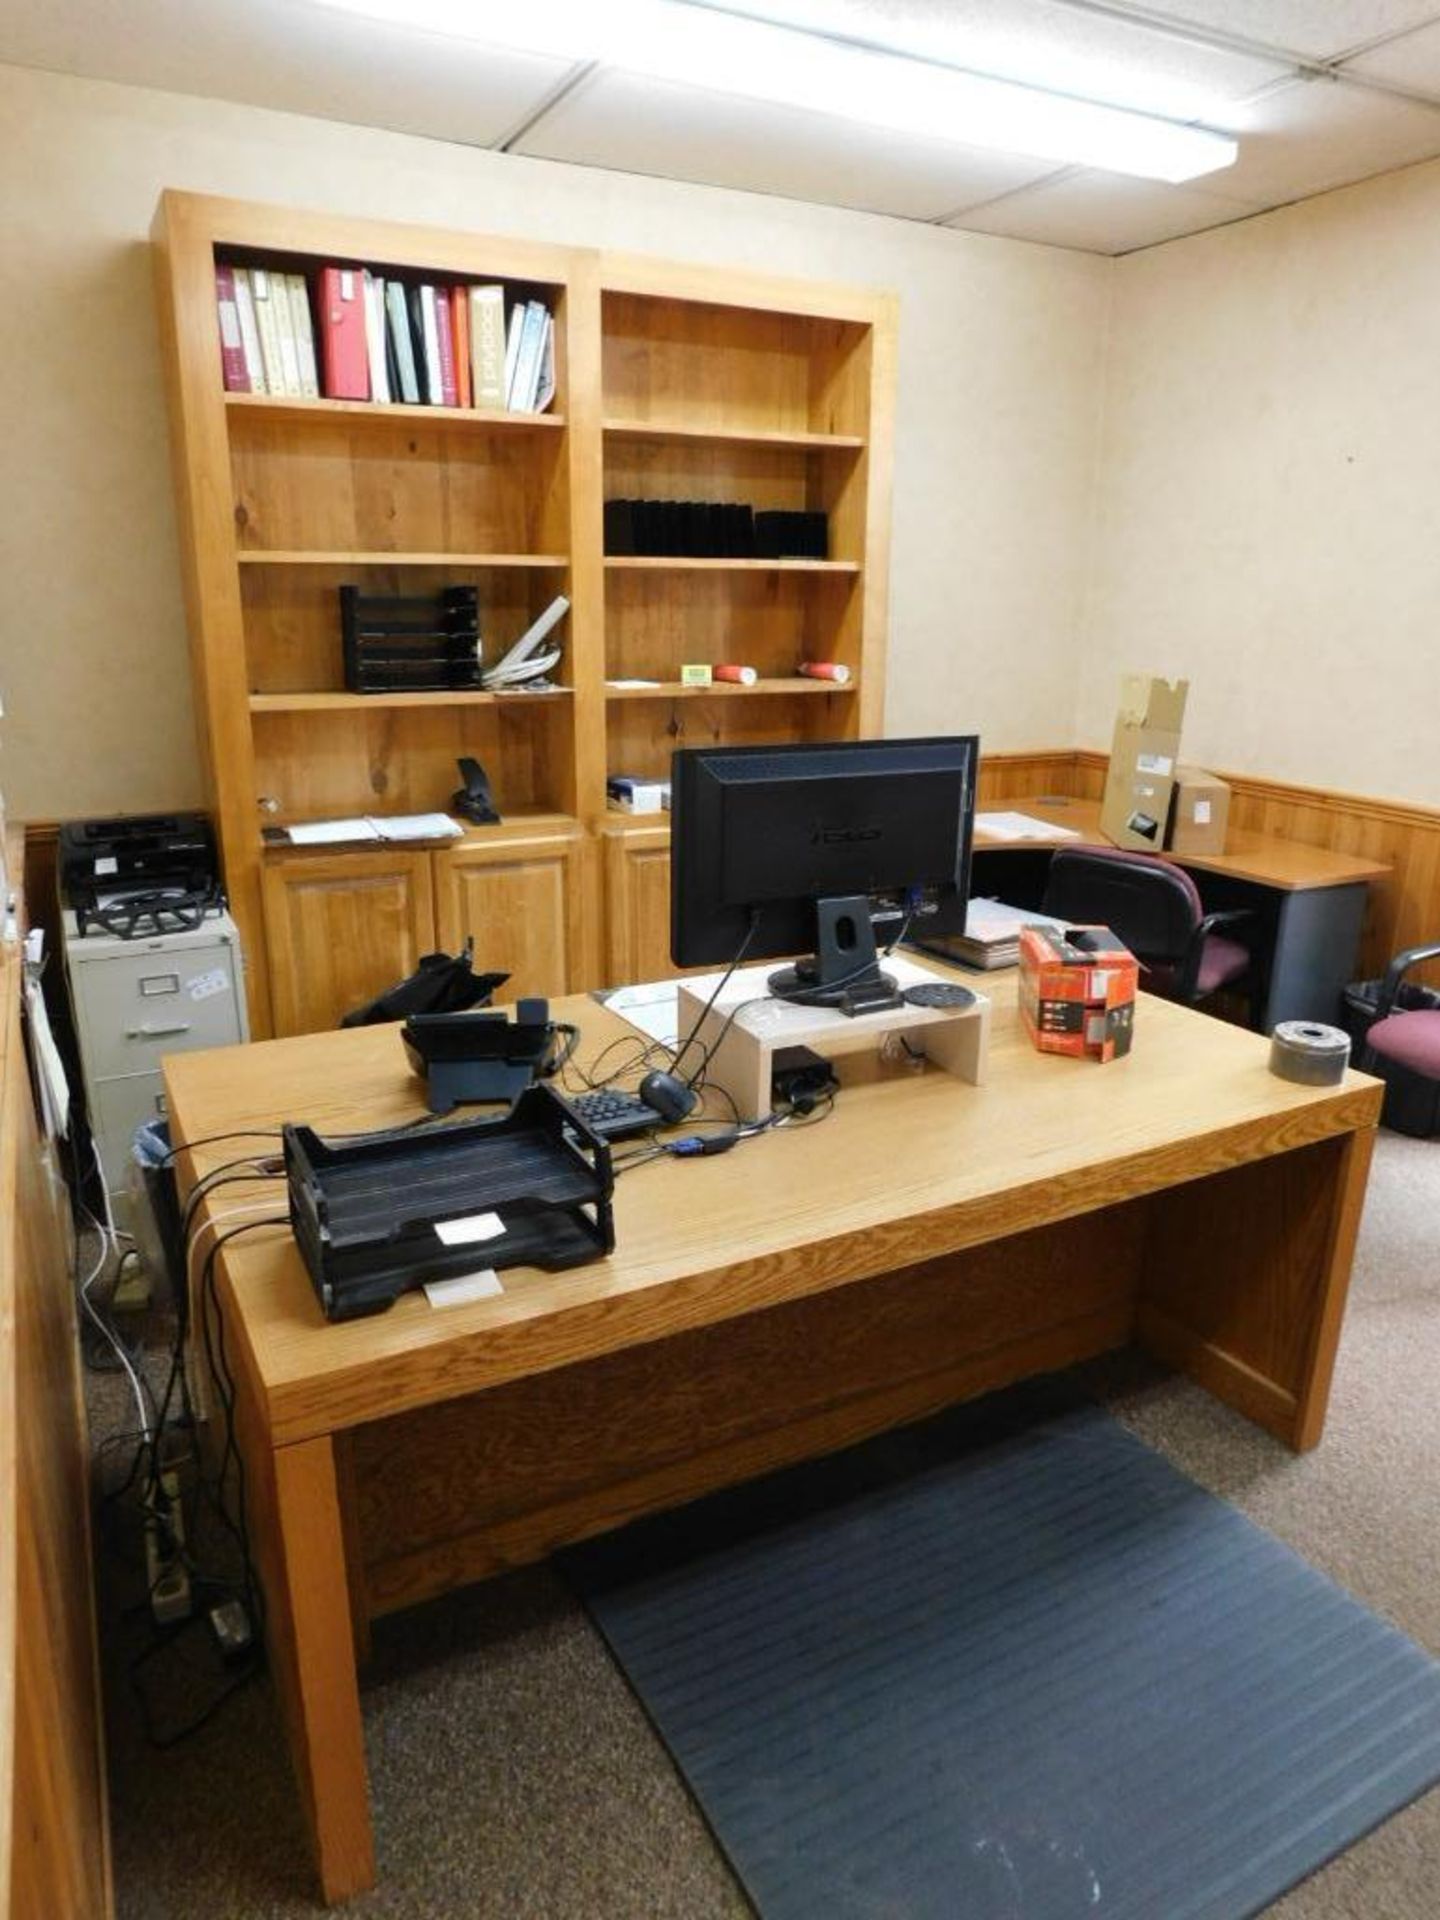 LOT: Contents of Main Office (NO ART, NO ELECTRONICS, NOTHING ATTACHED TO WALLS) - Image 6 of 27